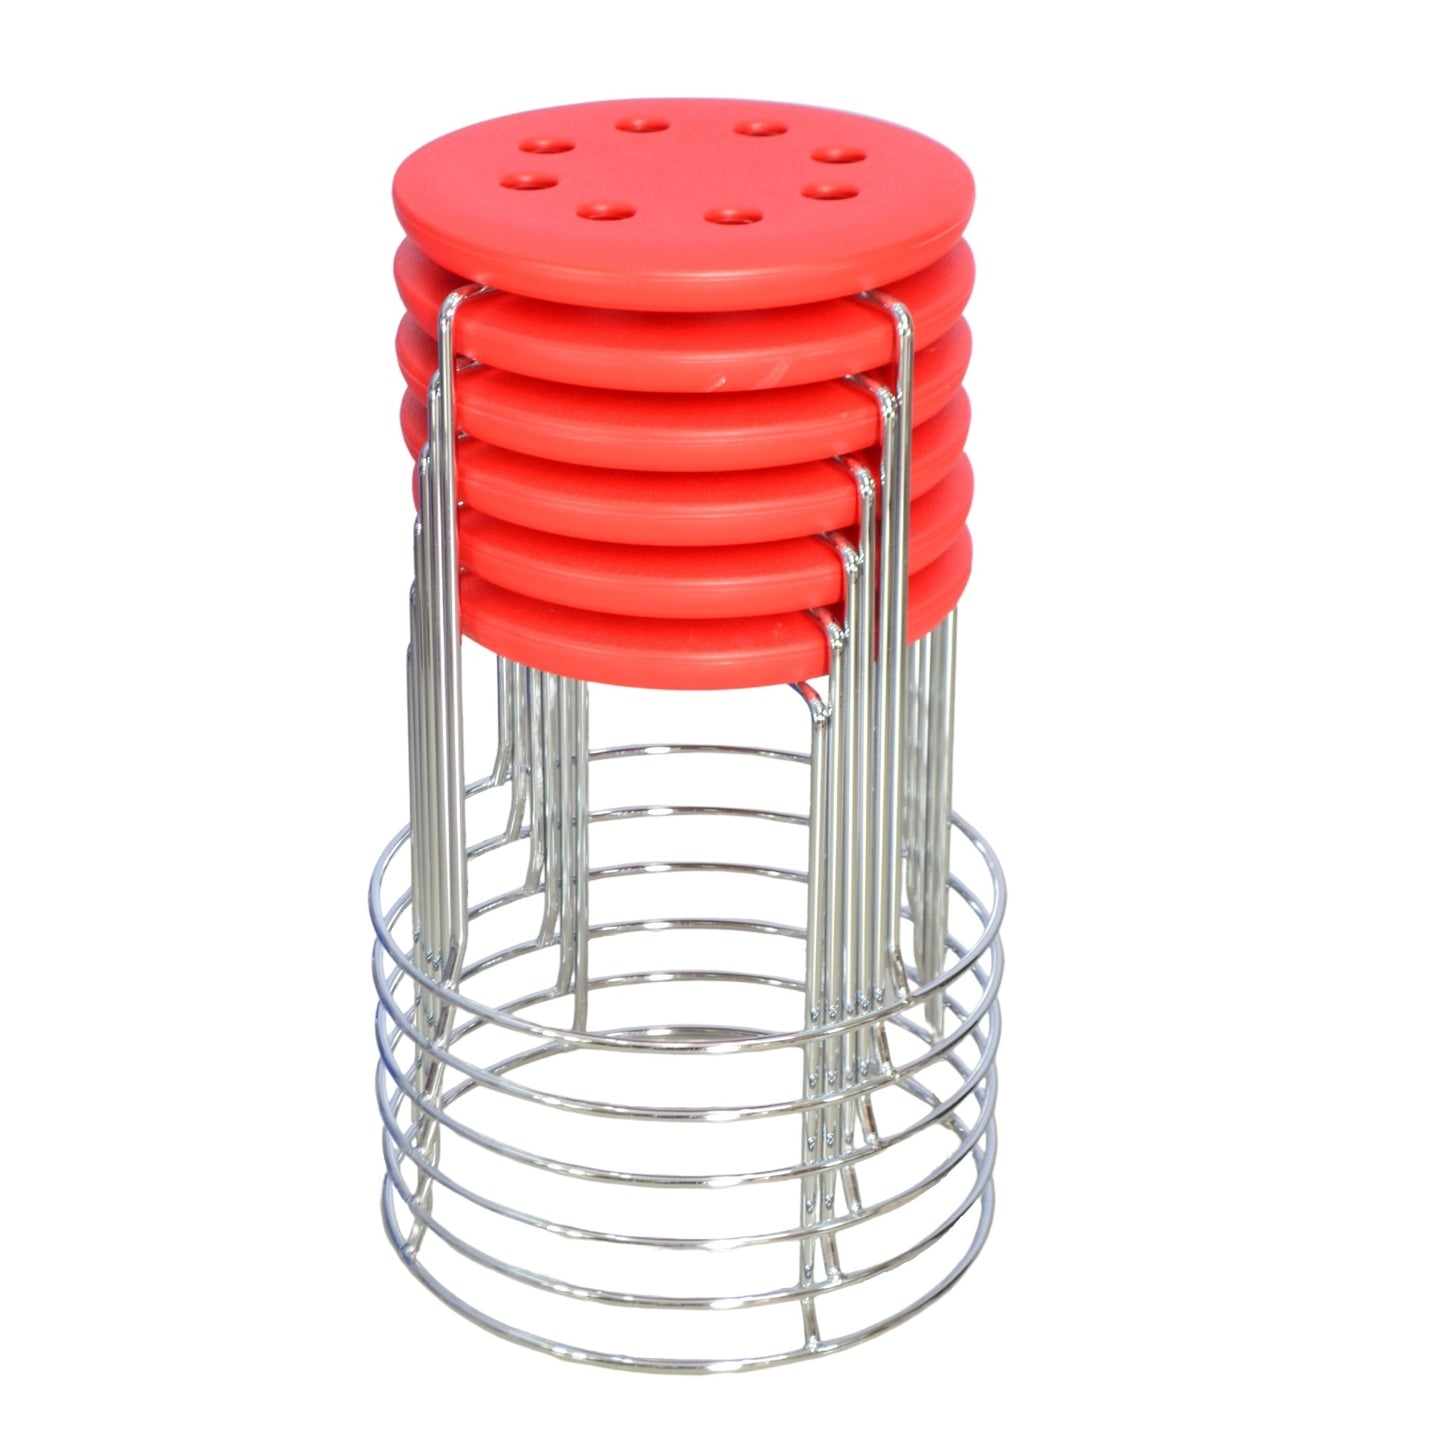 6 Combo Ring Stool (FT- S02) Red